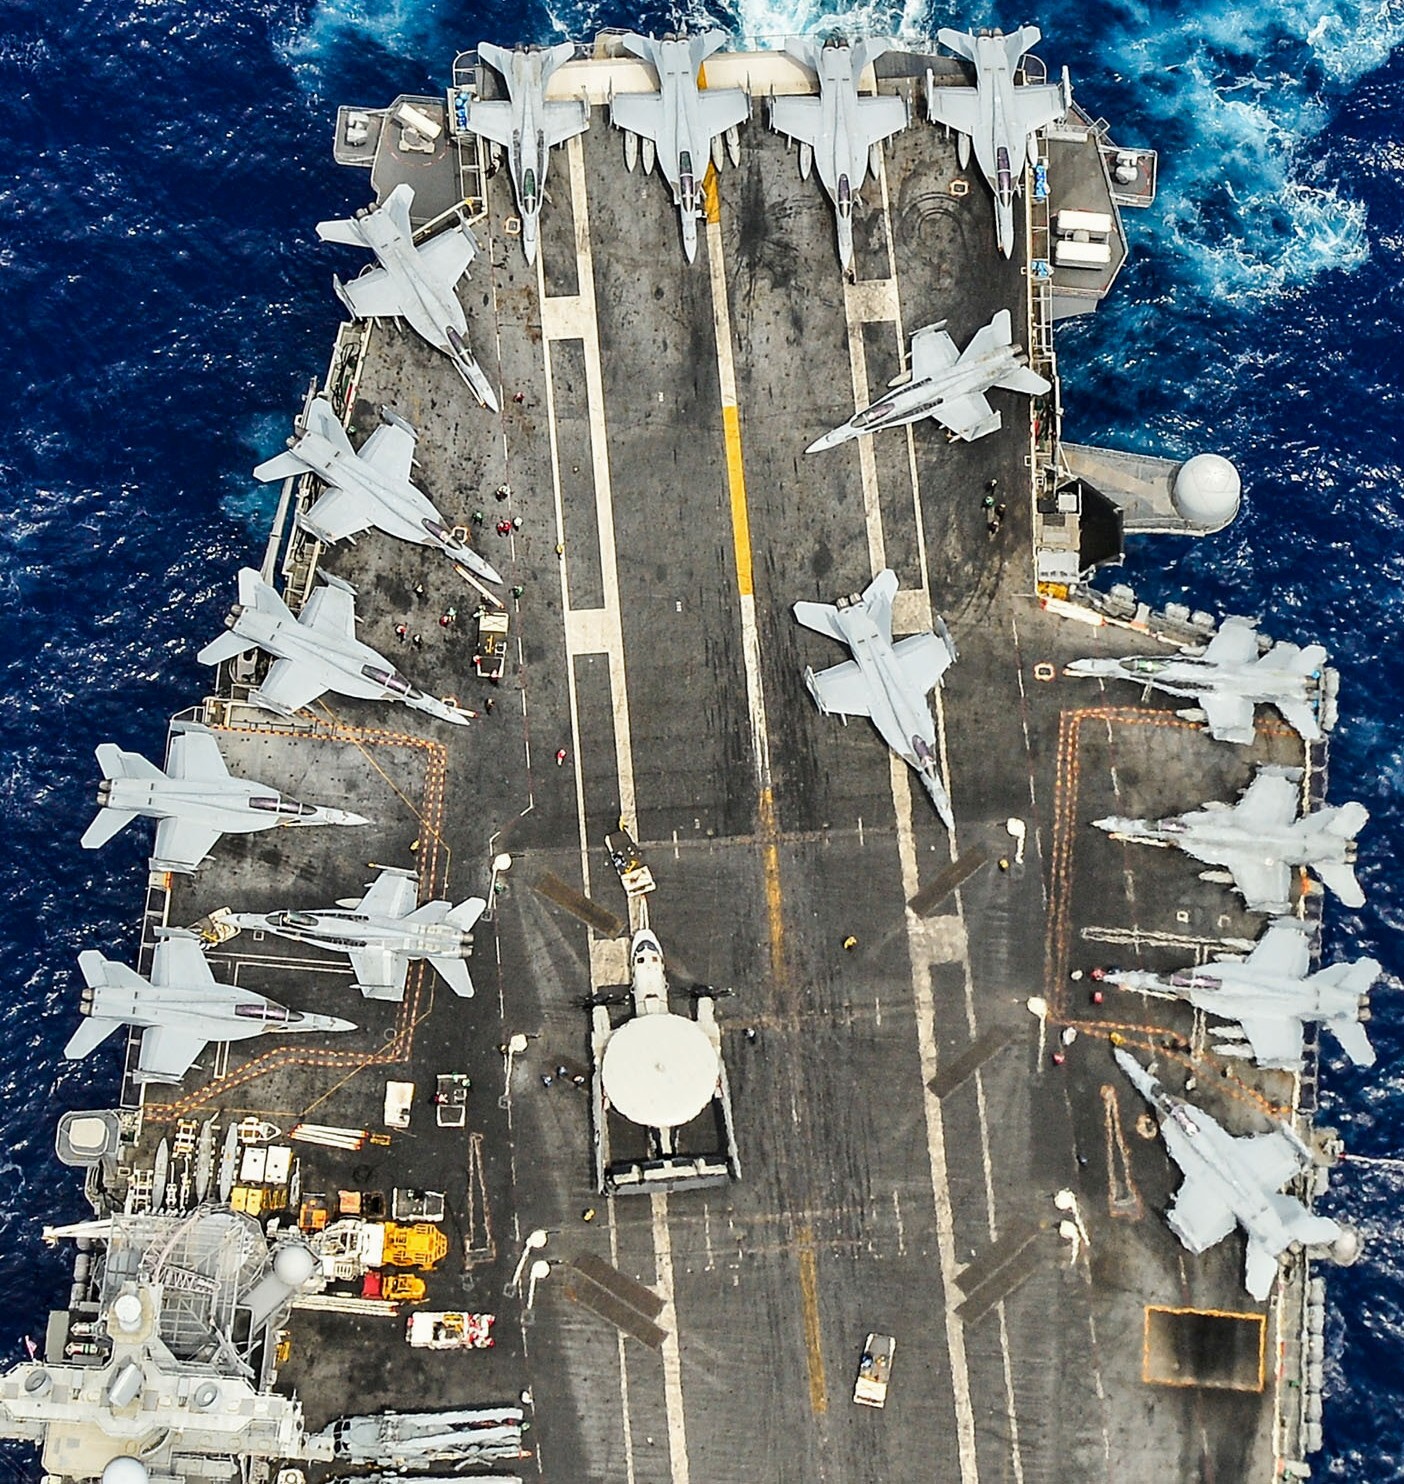 cvw-2 carrier air wing us navy uss ronald reagan cvn-76 embarked squadrons 05